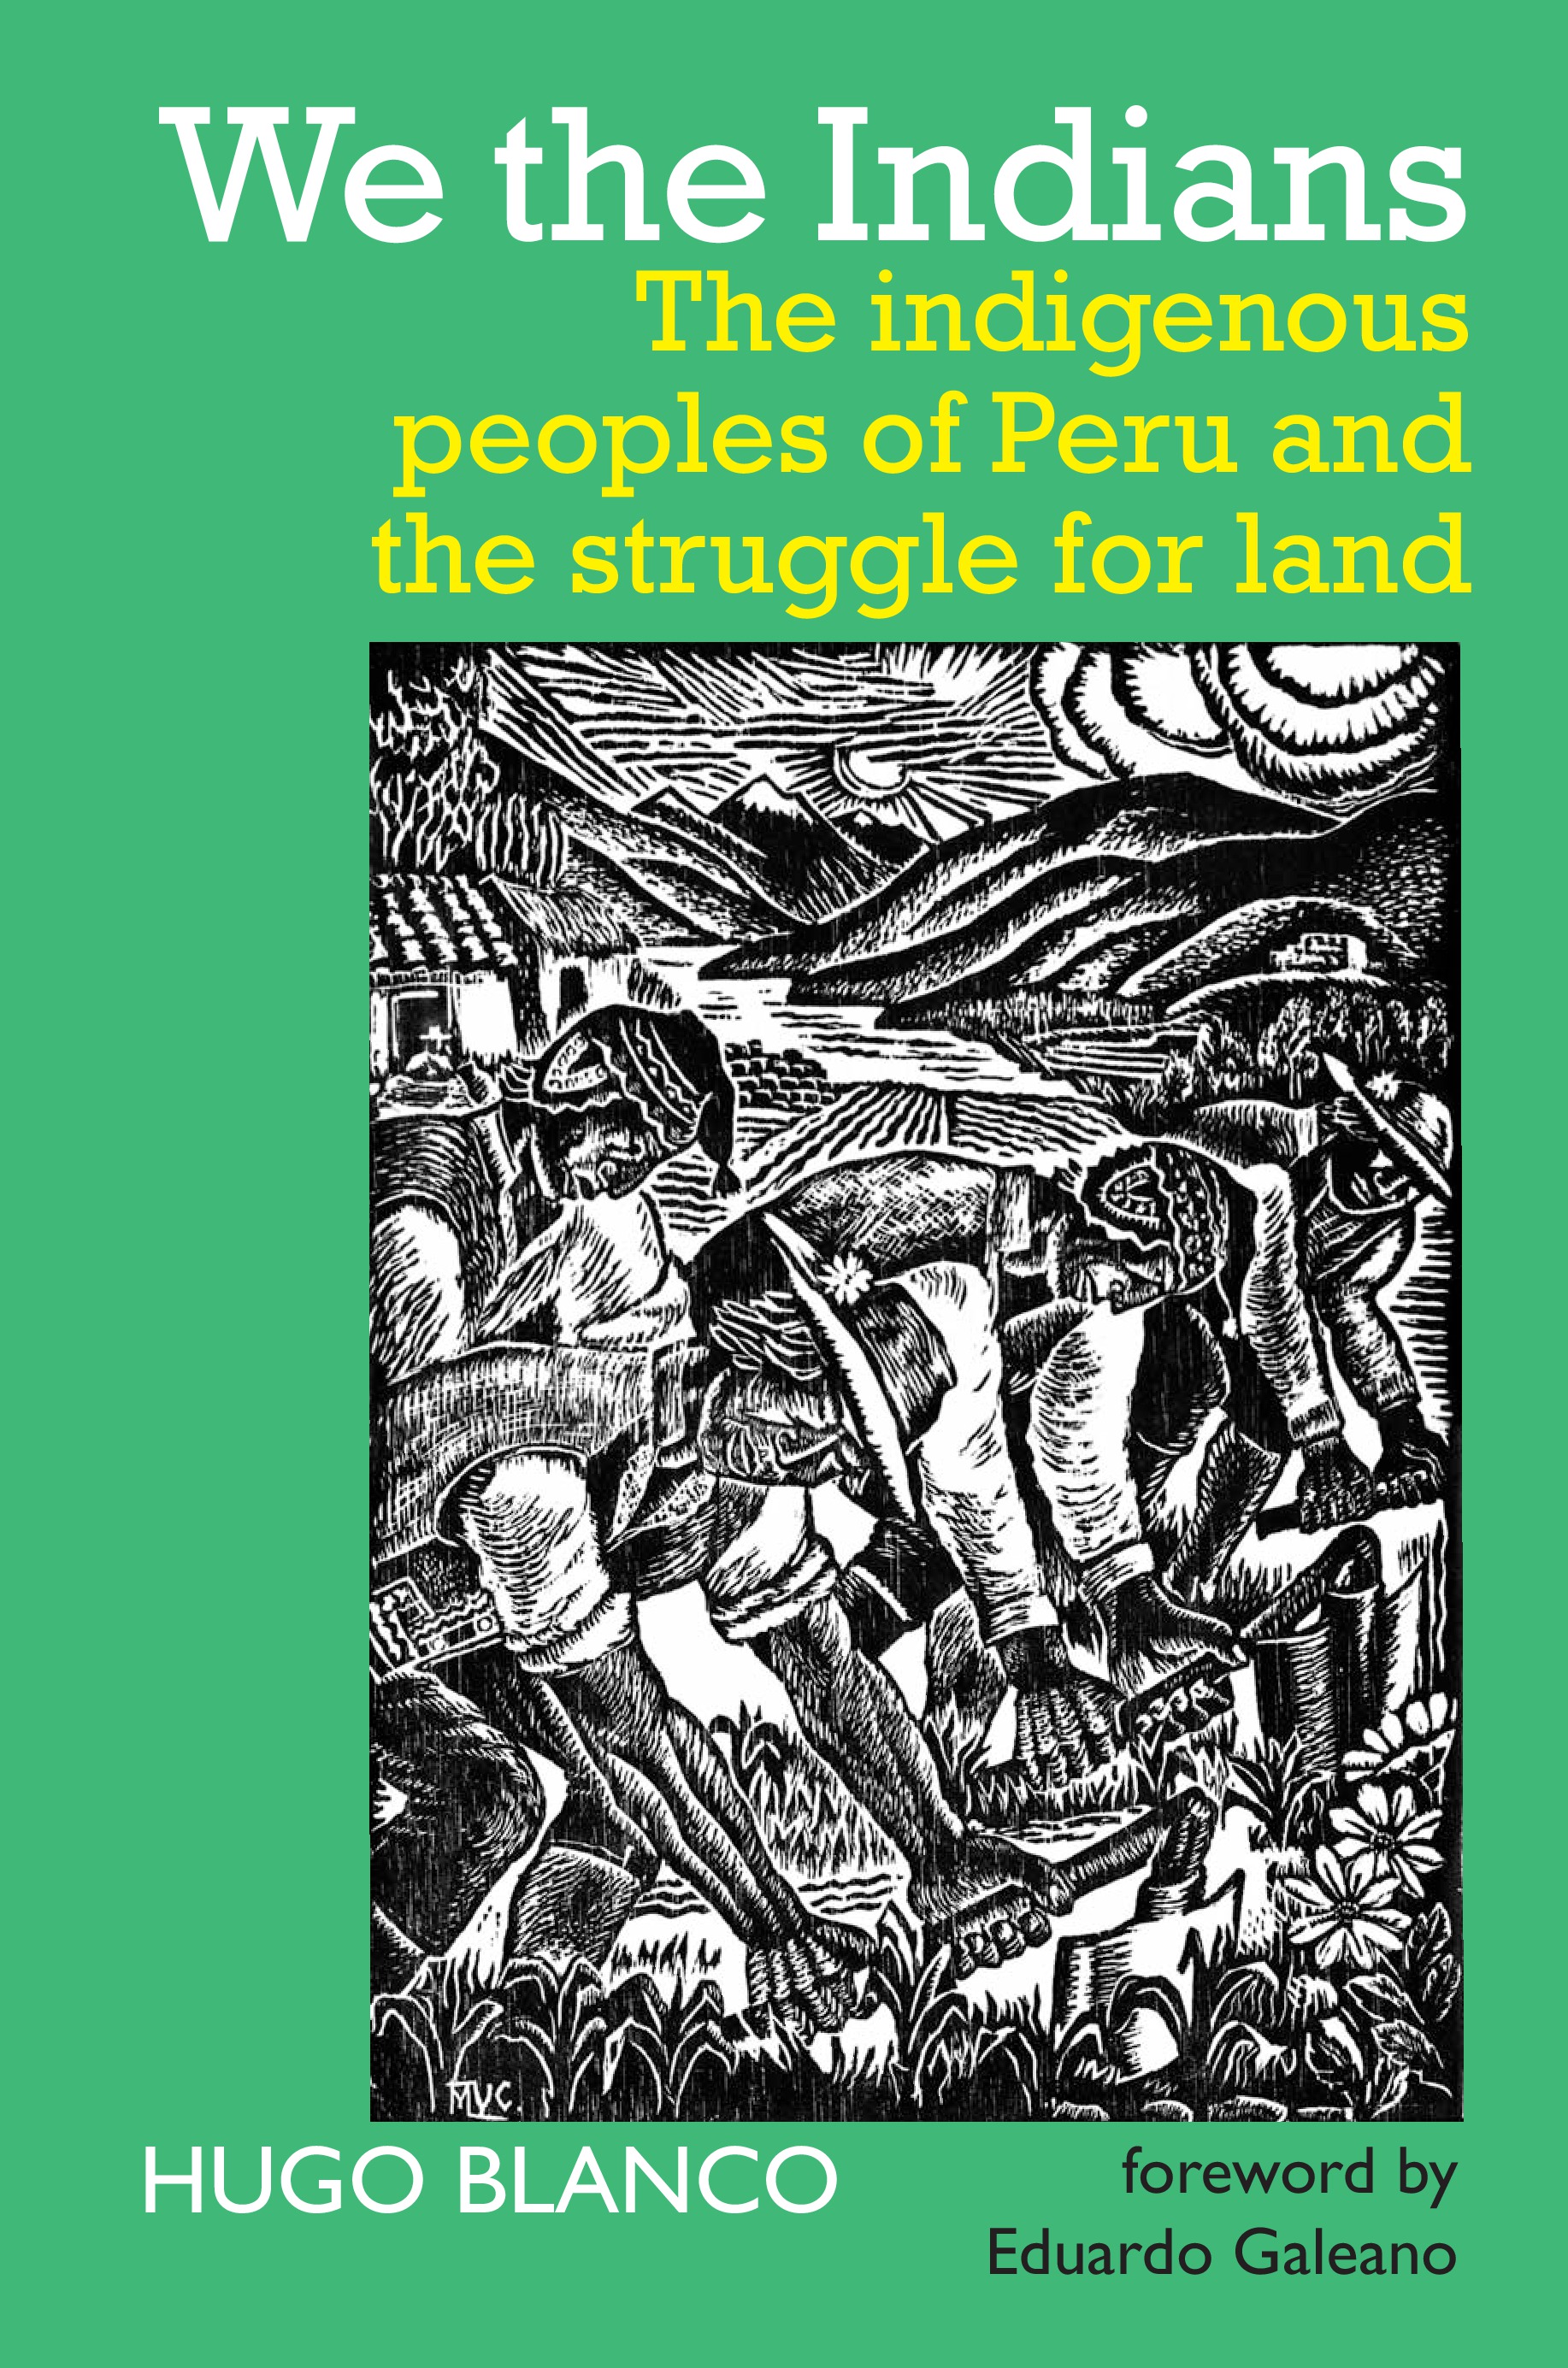 We the Indians – The indigenous peoples of Peru and the struggle for land